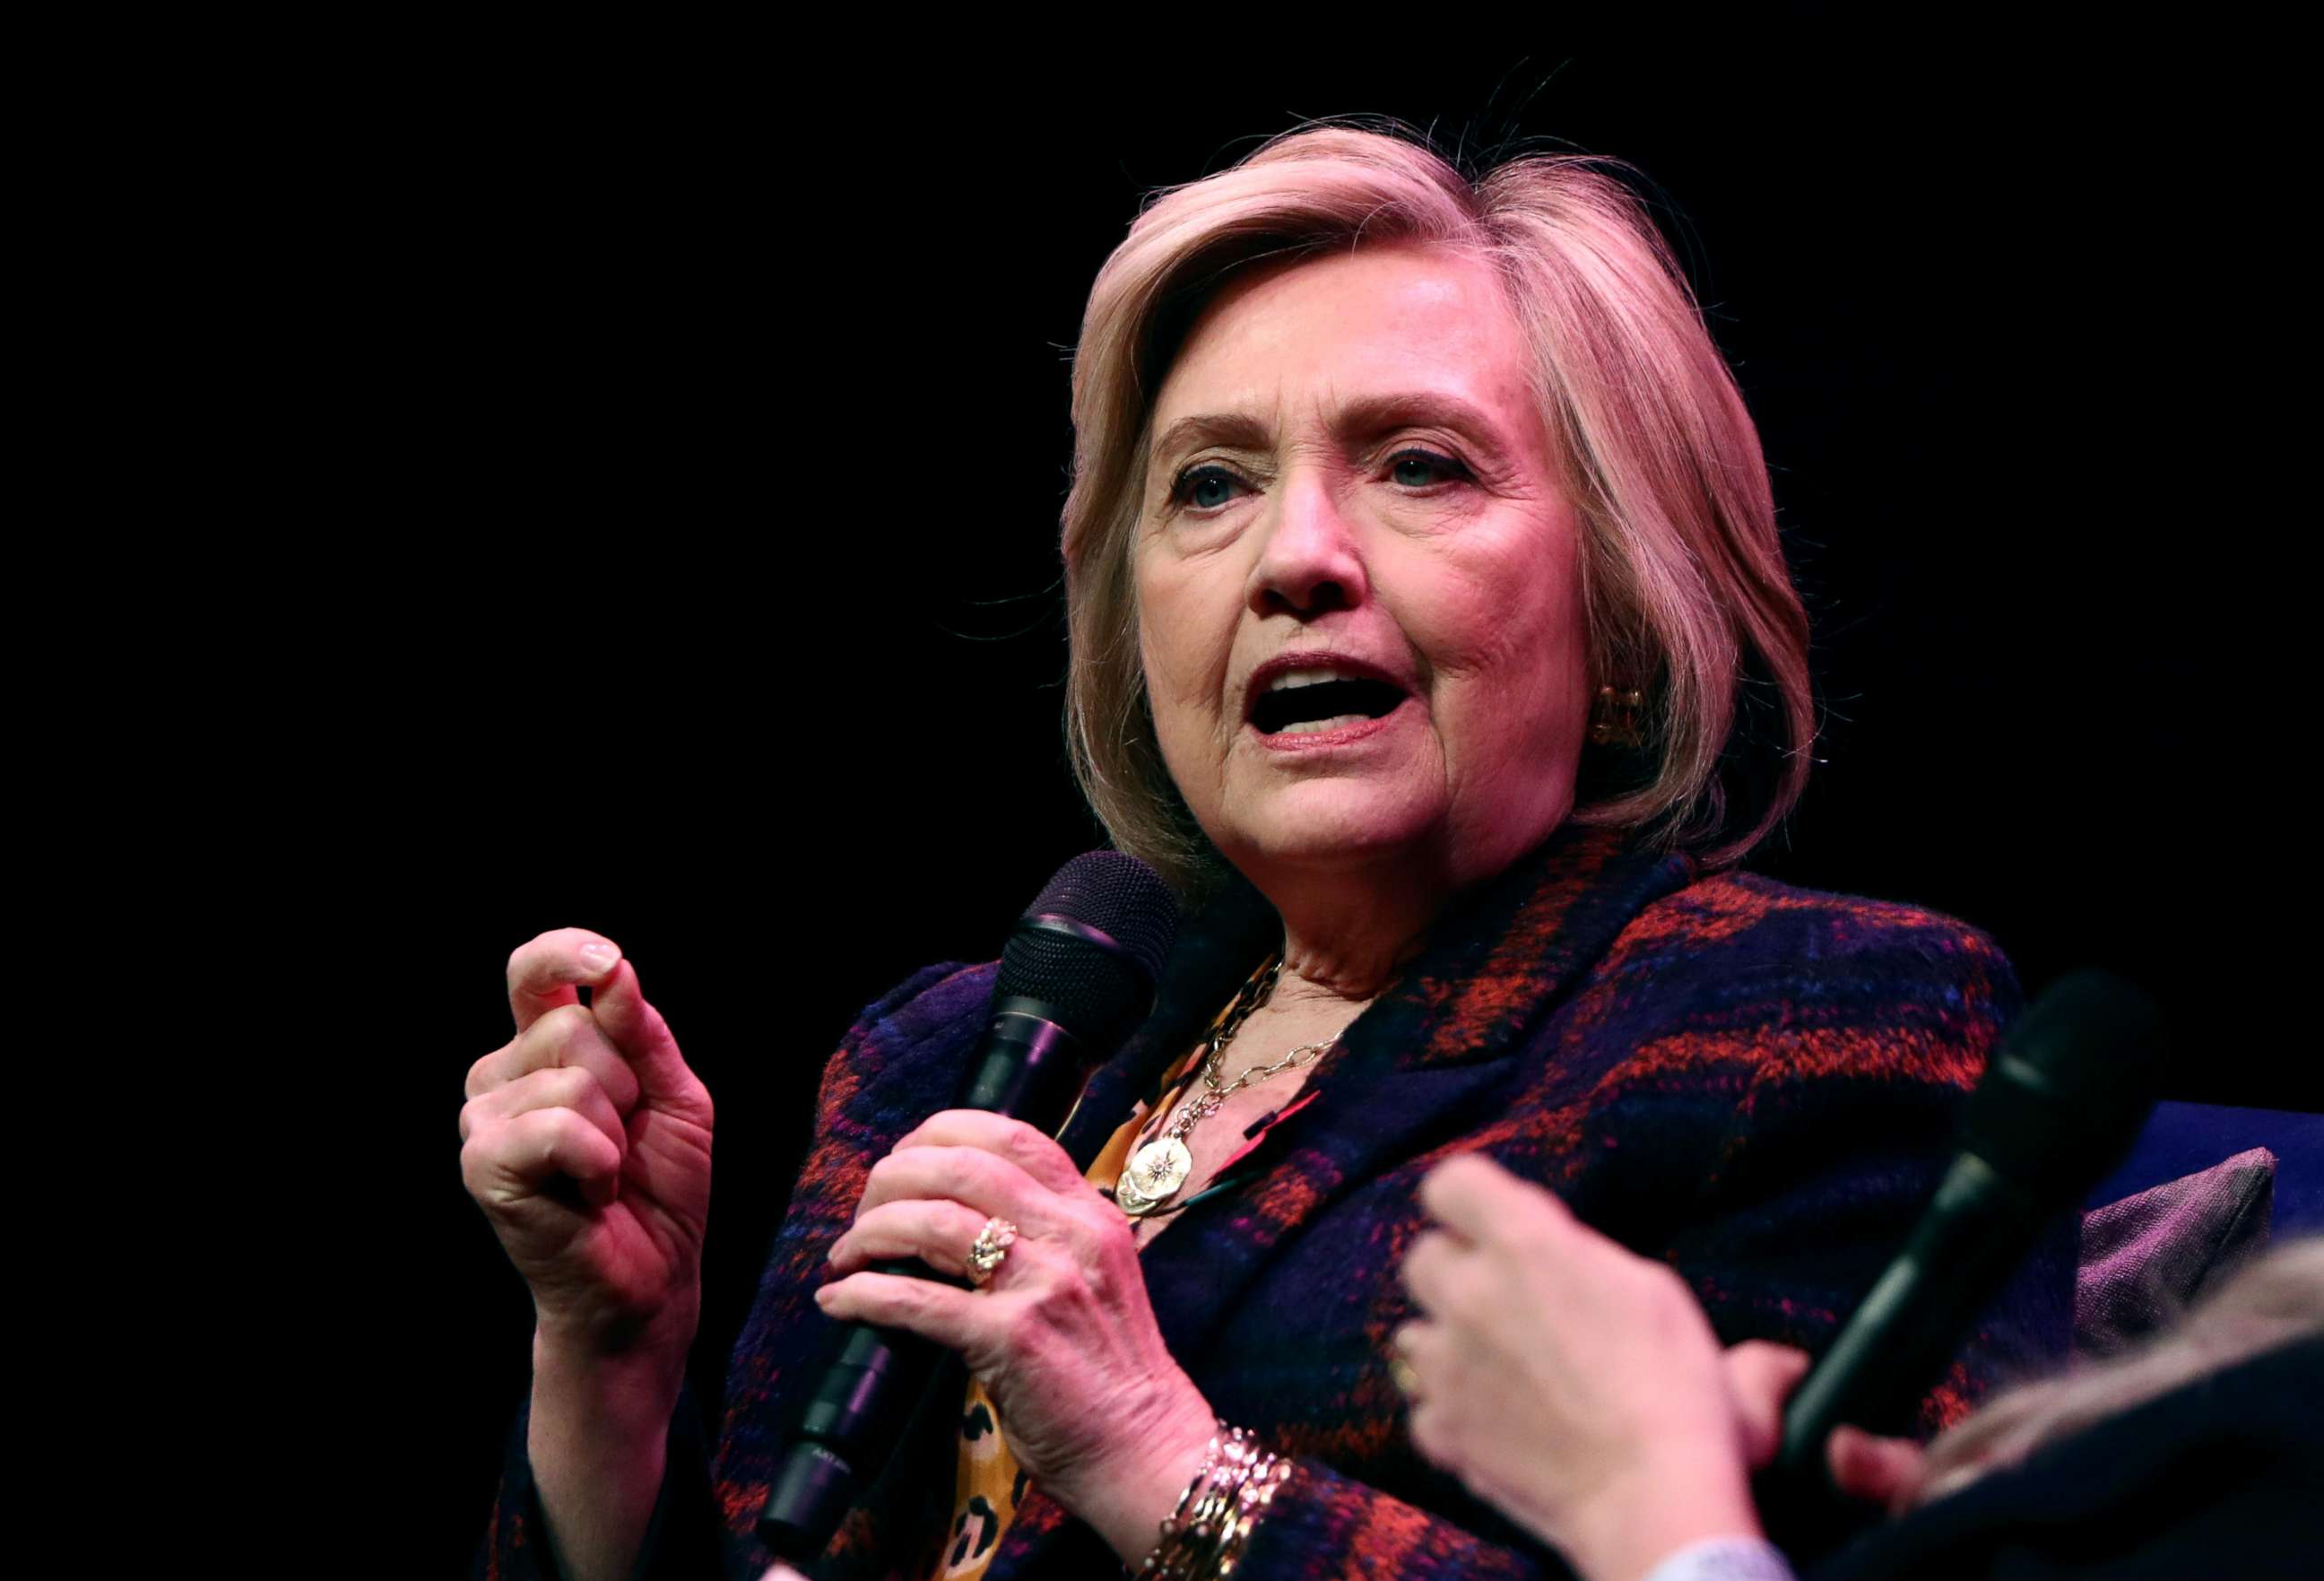 PHOTO: Former U.S. Secretary of State Hillary Clinton speaks during an event promoting "The Book of Gutsy Women" at the Southbank Centre in London, Nov. 10, 2019.